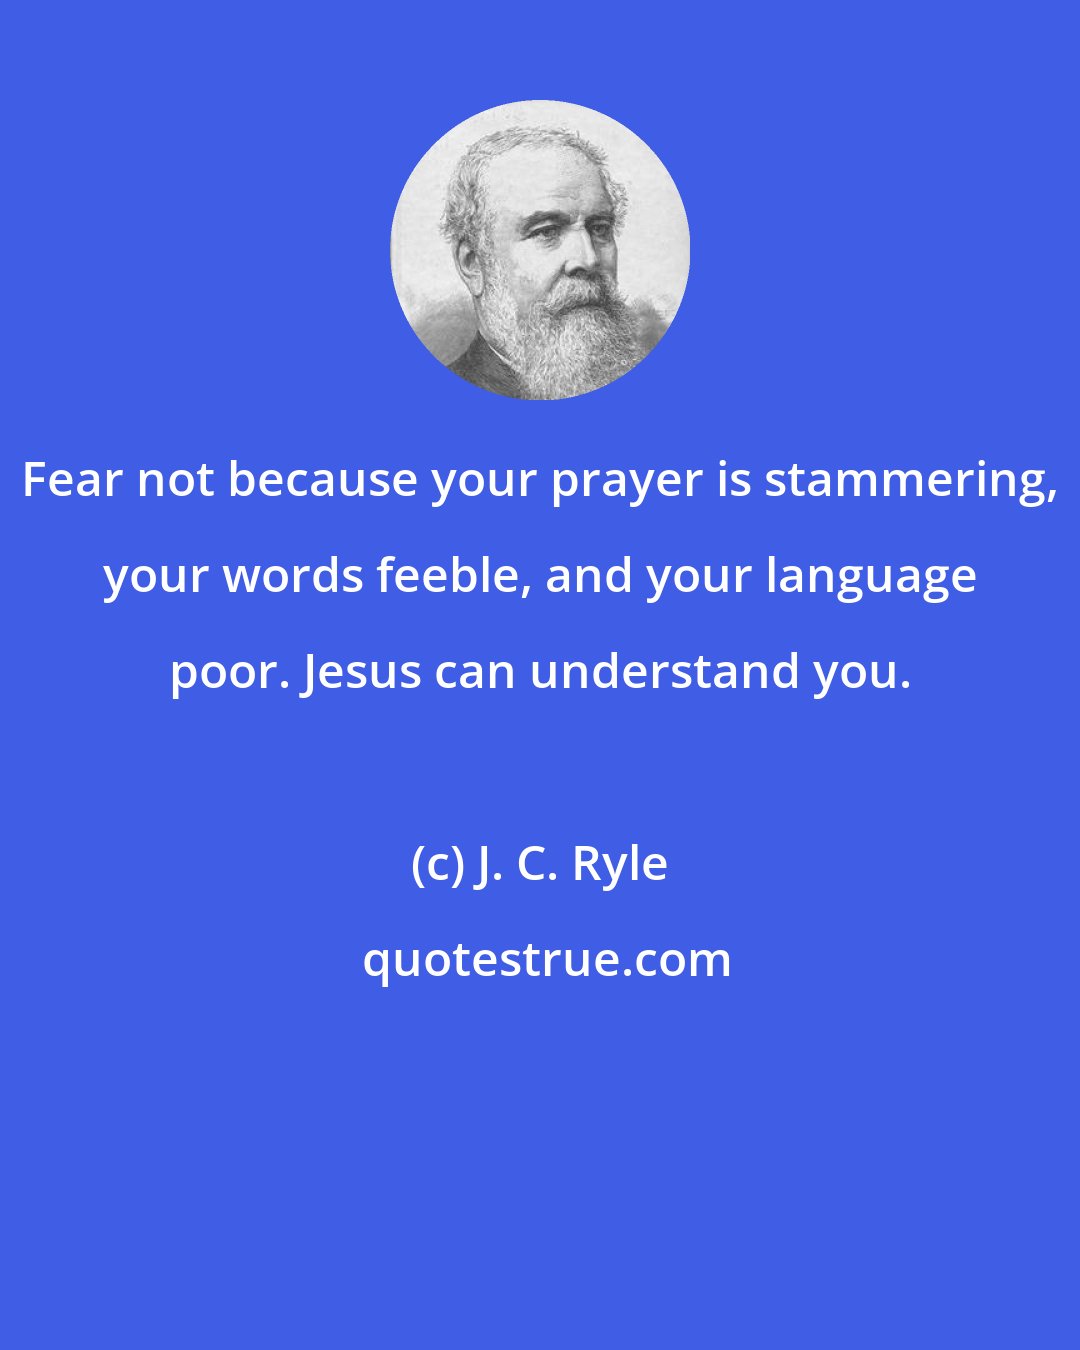 J. C. Ryle: Fear not because your prayer is stammering, your words feeble, and your language poor. Jesus can understand you.